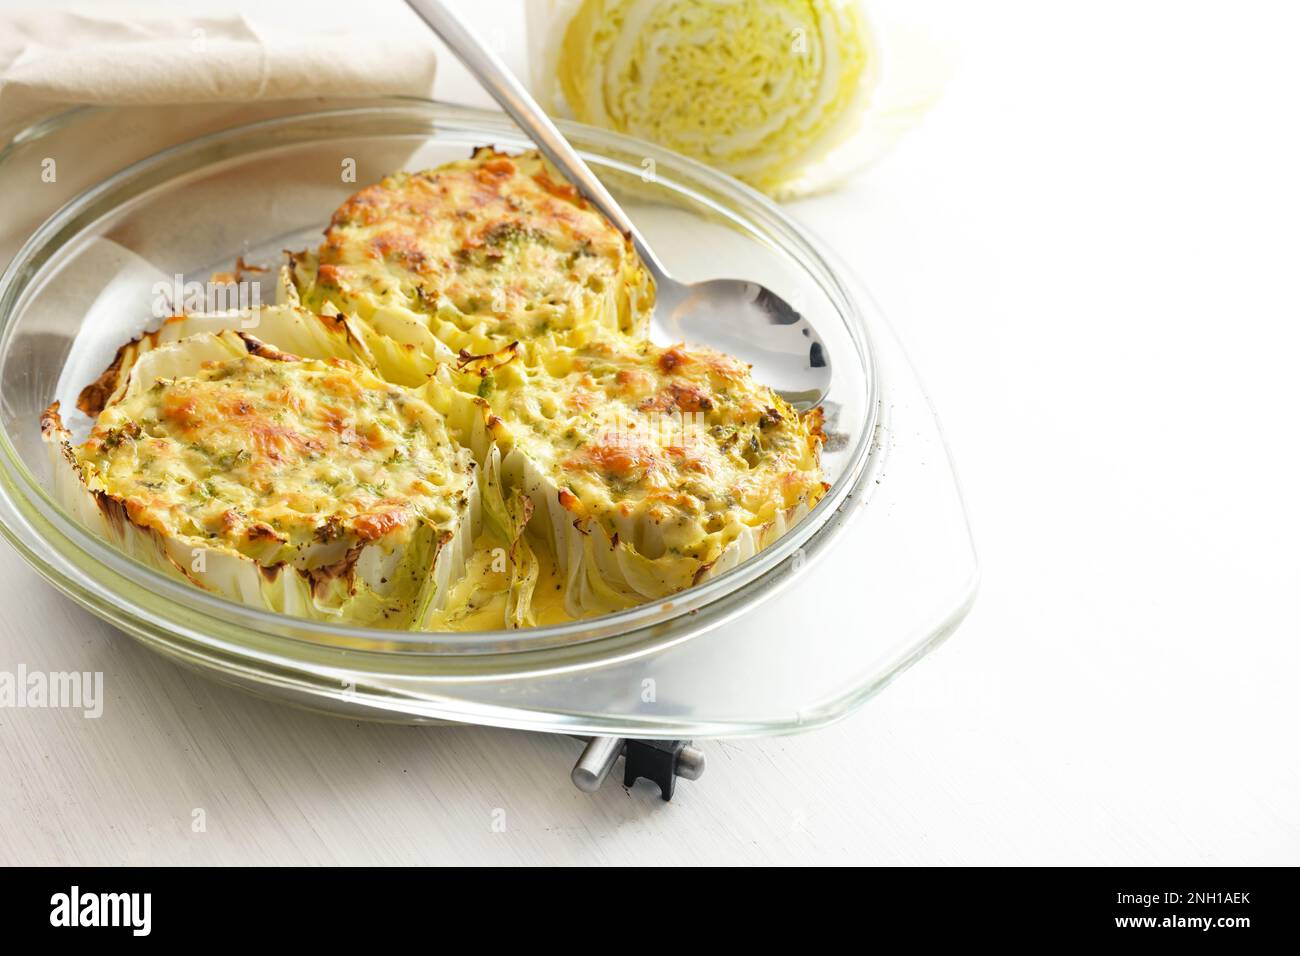 Chinese or napa cabbage gratinated in a glass casserole on a light gray table, healthy cooking, homemade vegetarian meal, copy space, selected focus, Stock Photo